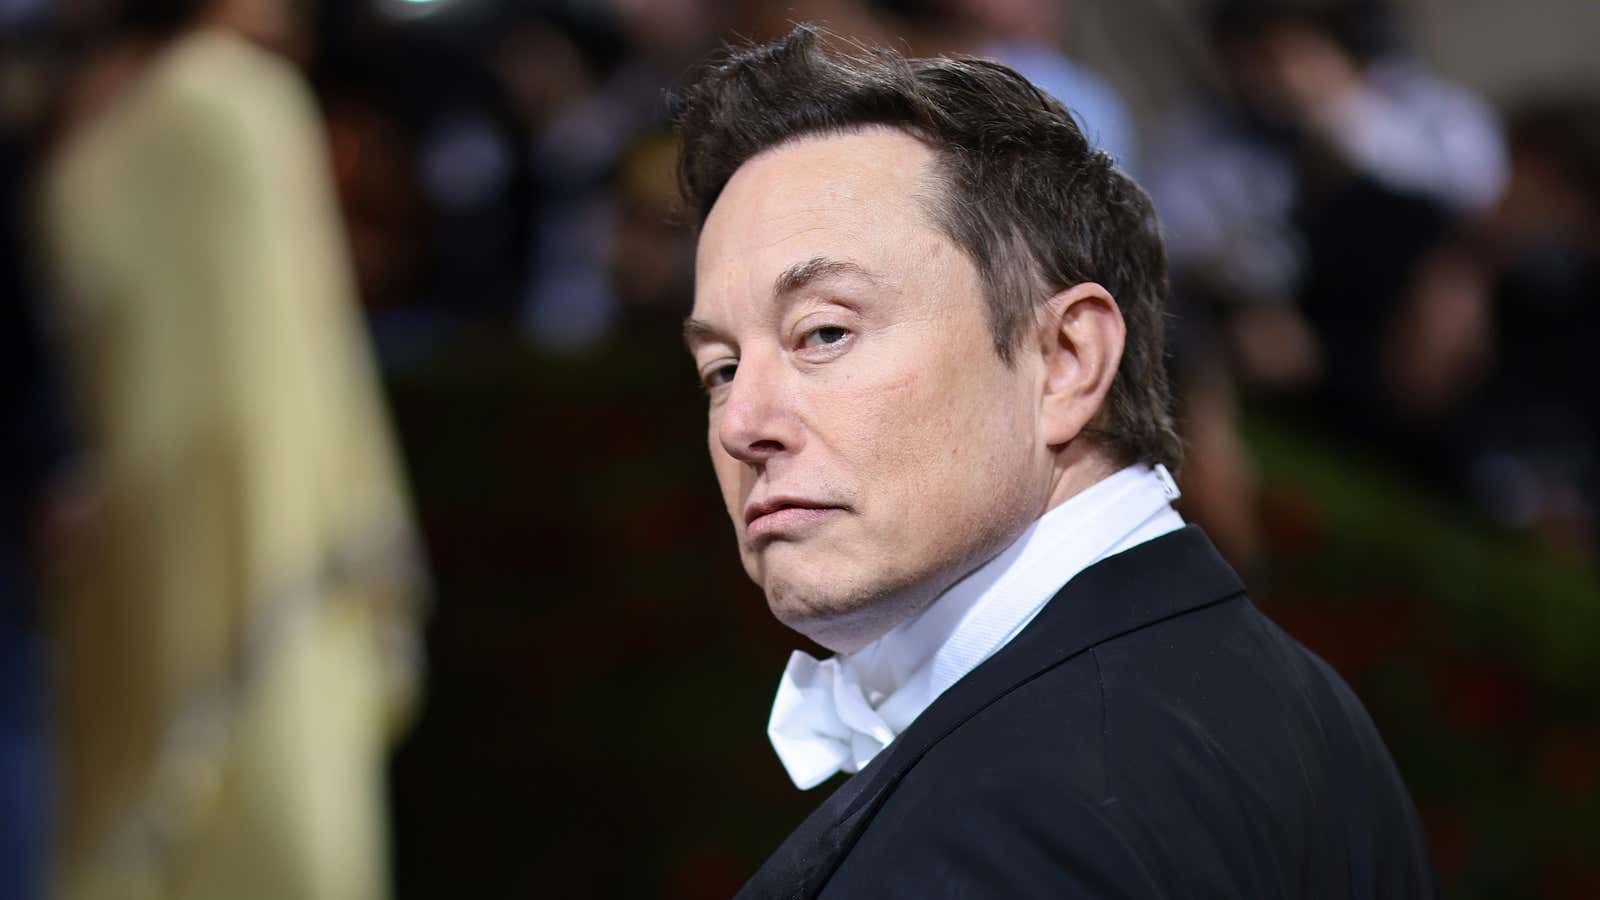 Elon Musk has disappeared from Twitter.